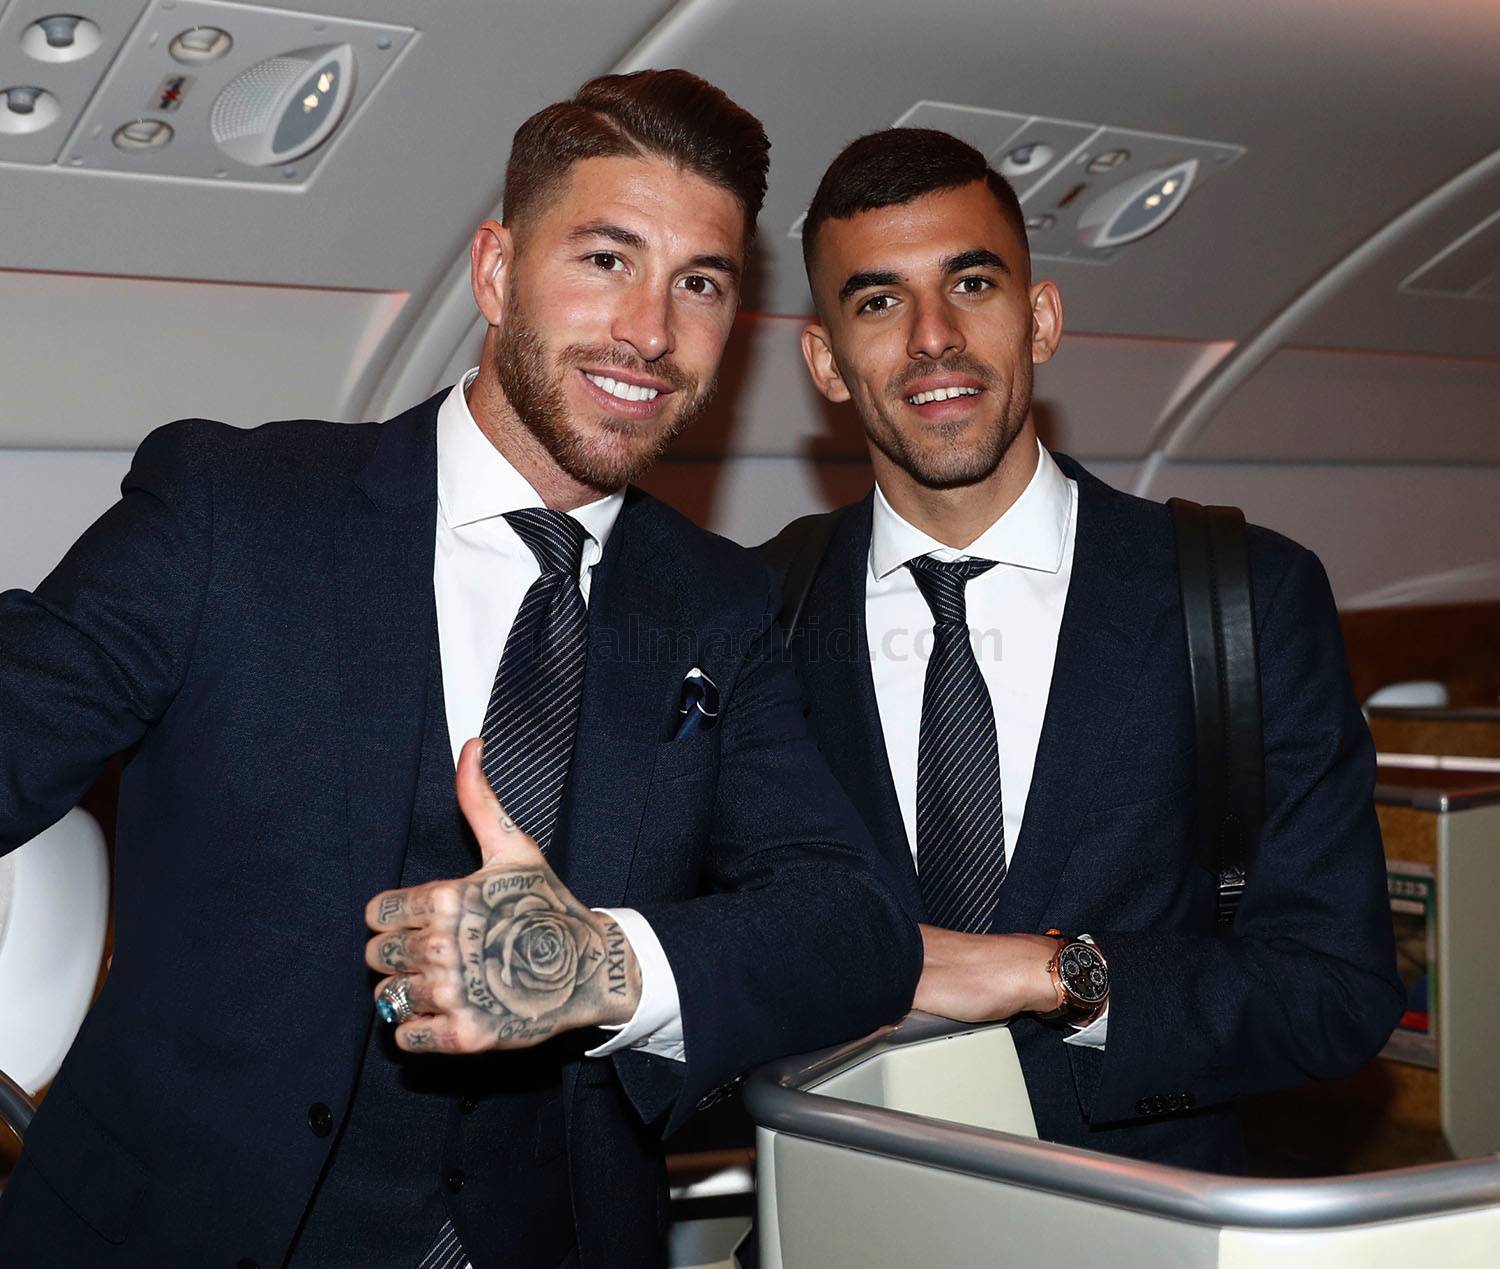 Real Madrid begin their journey to the Club World Cup - Foto 5 de 9 ...